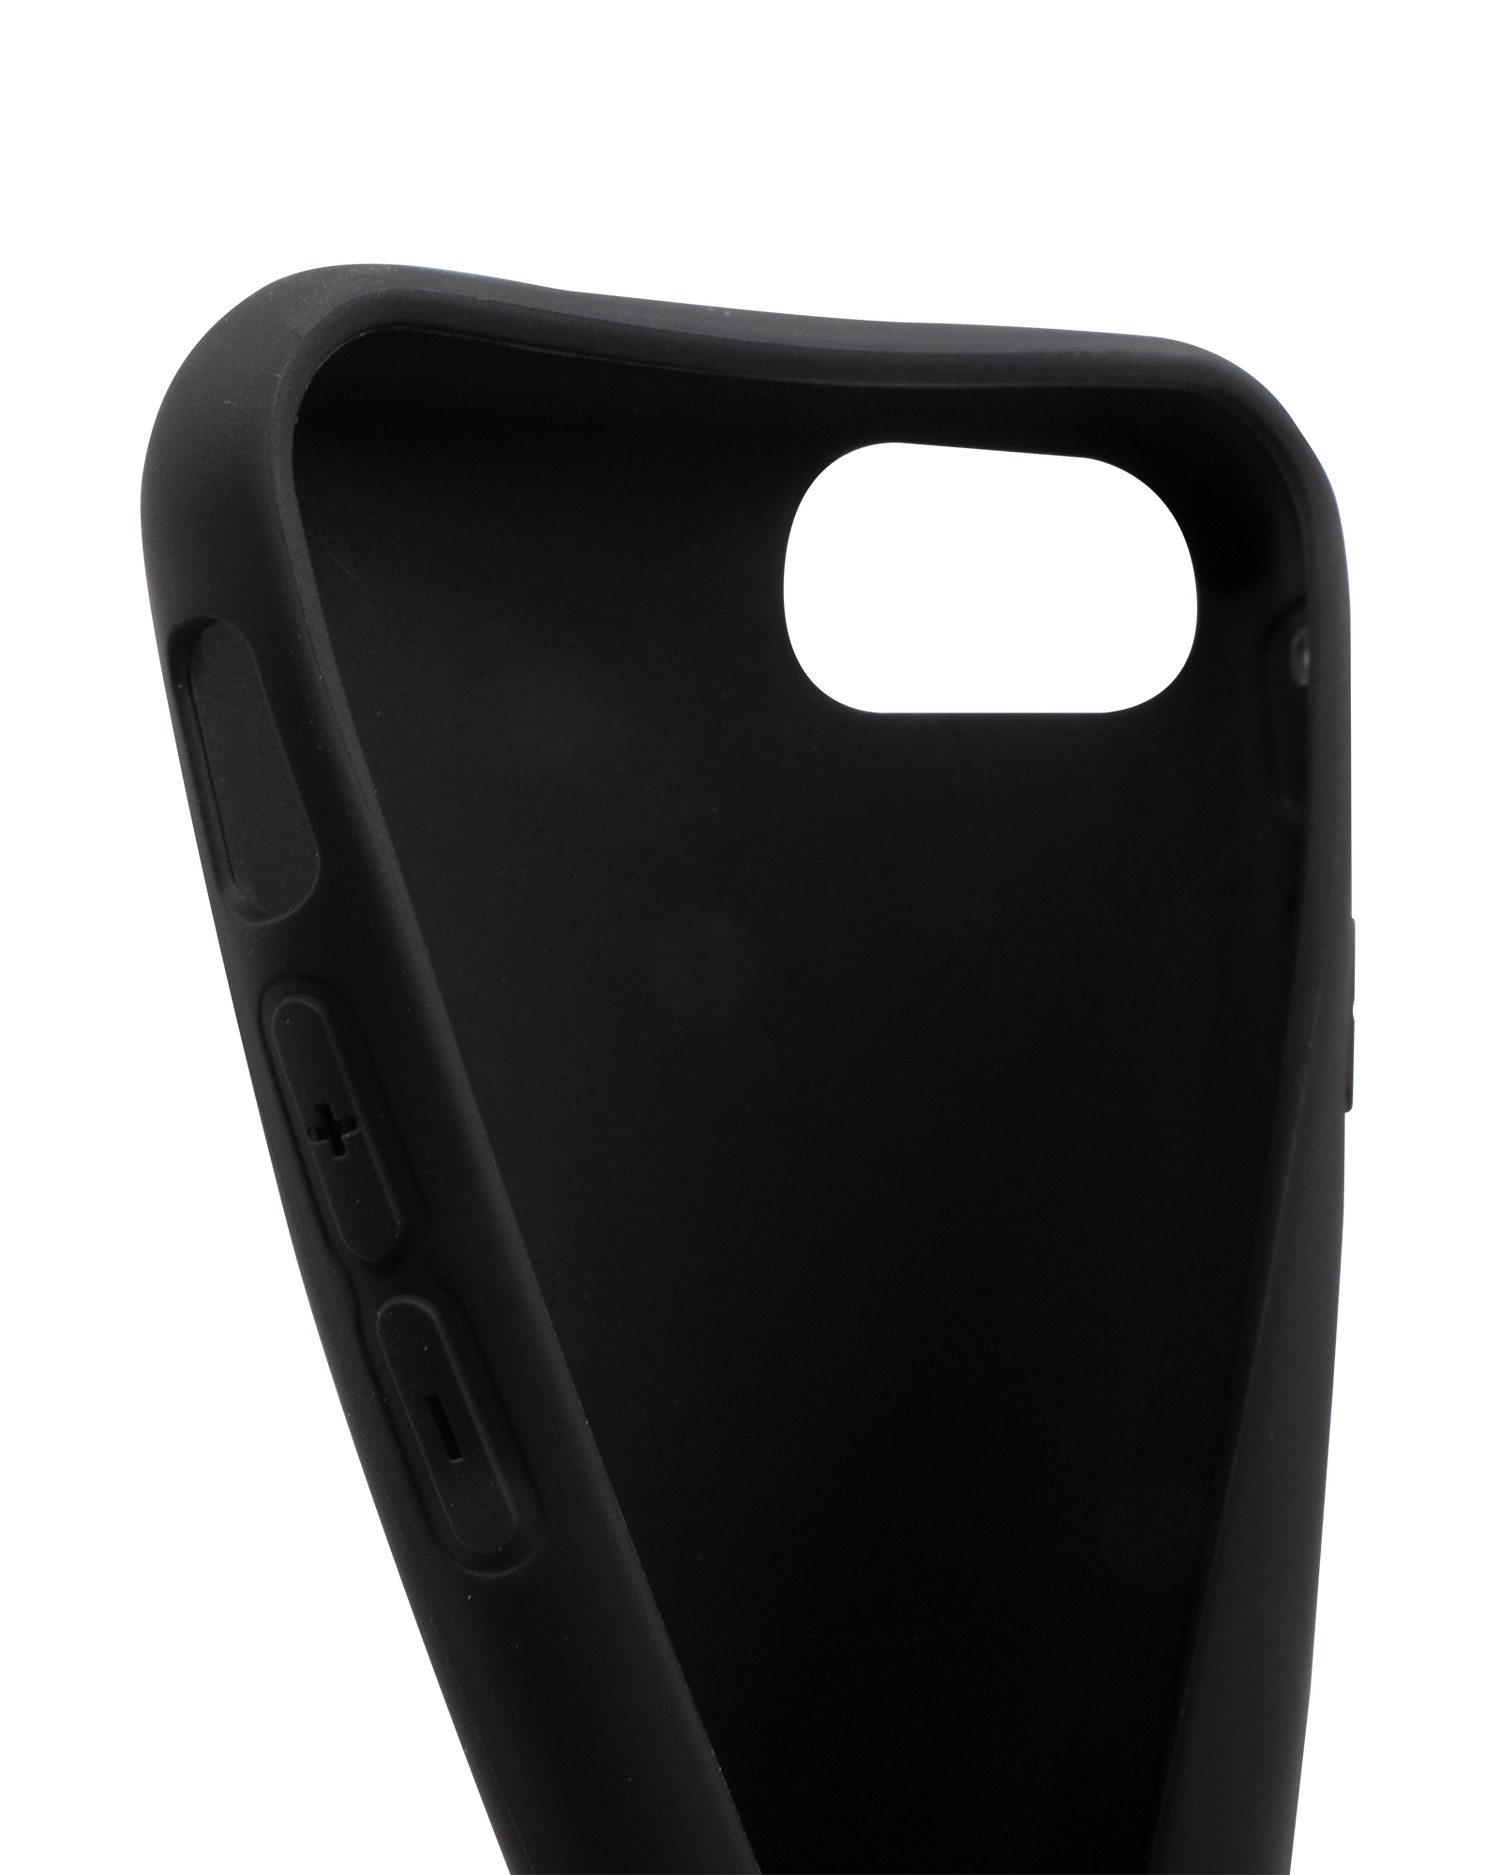 Black Silicone Phone Case for iPhone 7, iPhone 8 & iPhone SE (2020/2022): Very flexible